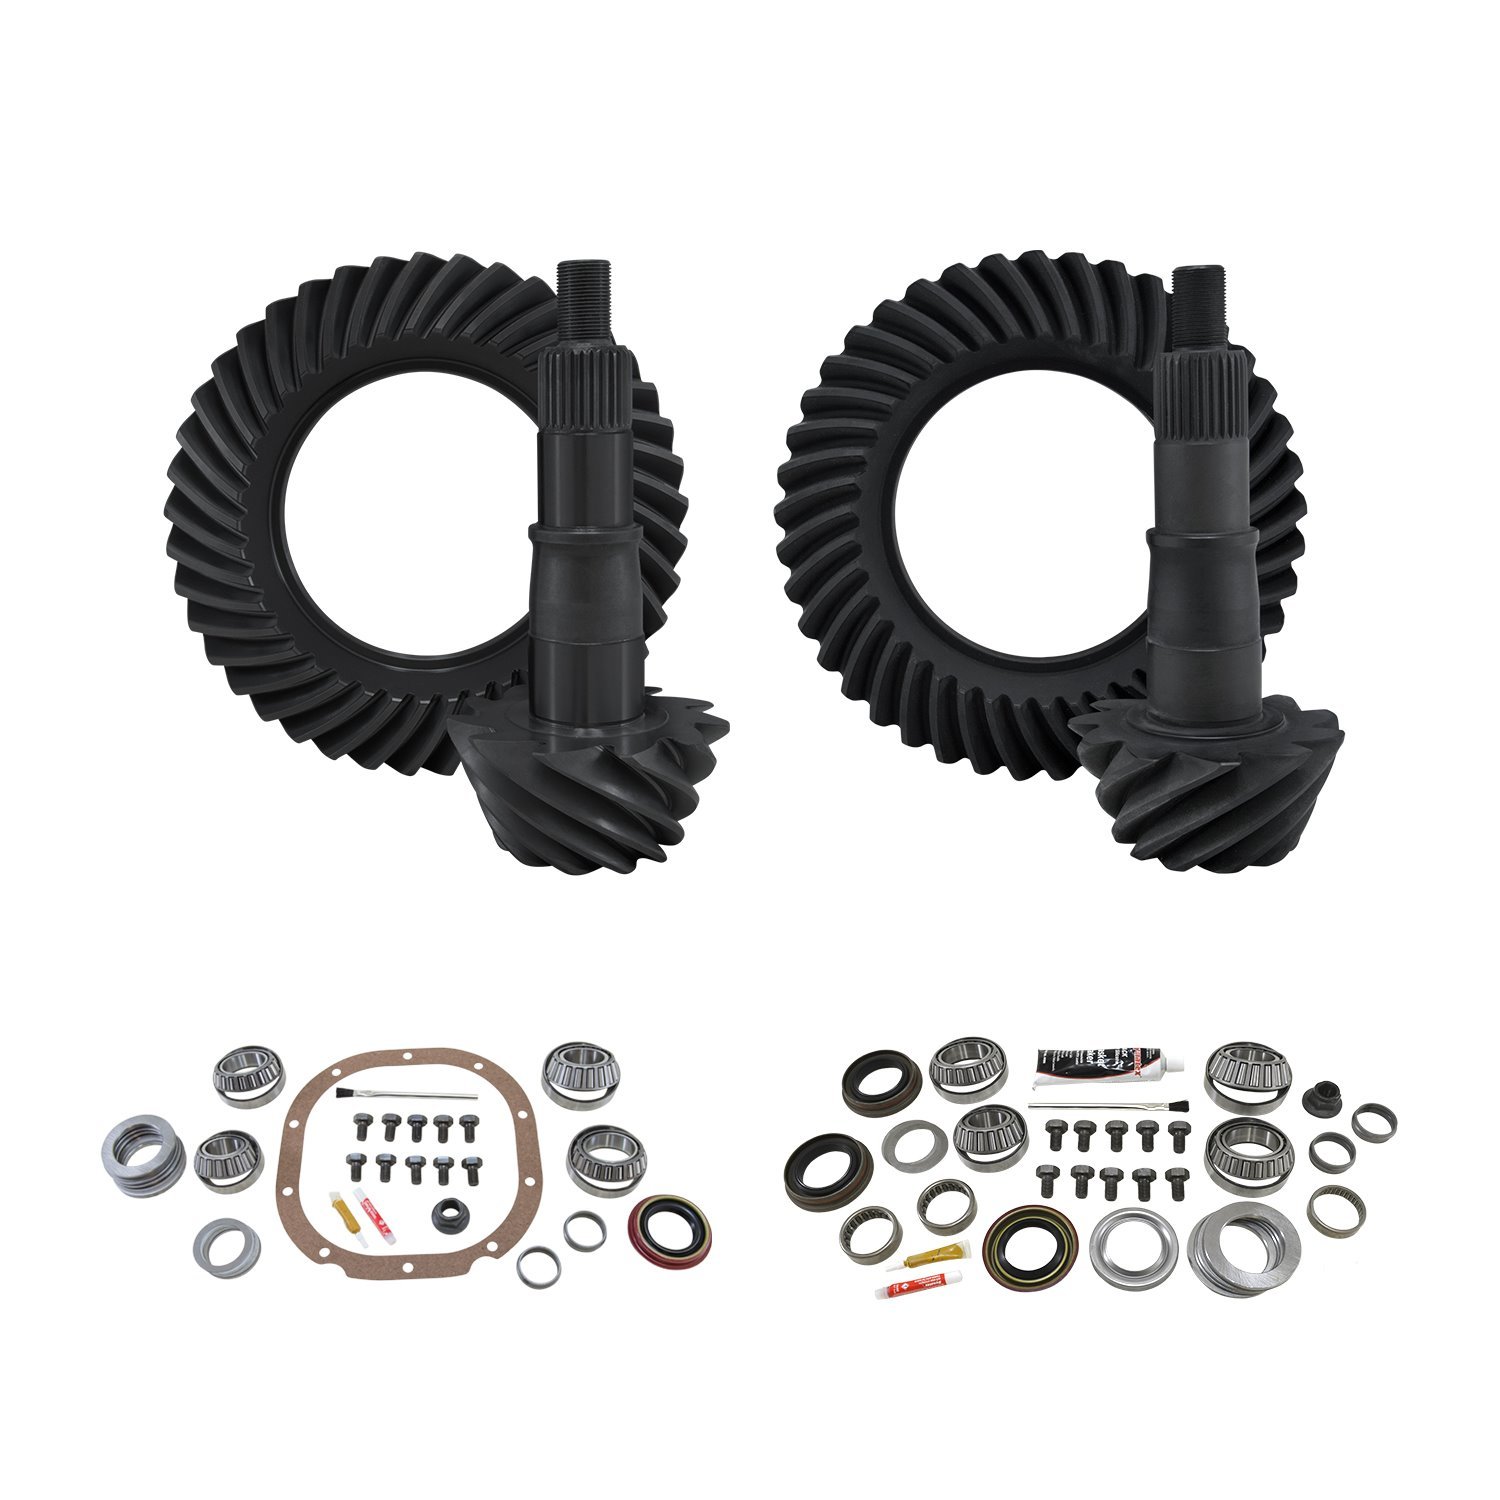 Re-Gear & Installation Kit, Ford 8.8 in., 2000-2008 F150, 4.11 Ratio, Fr&Rr